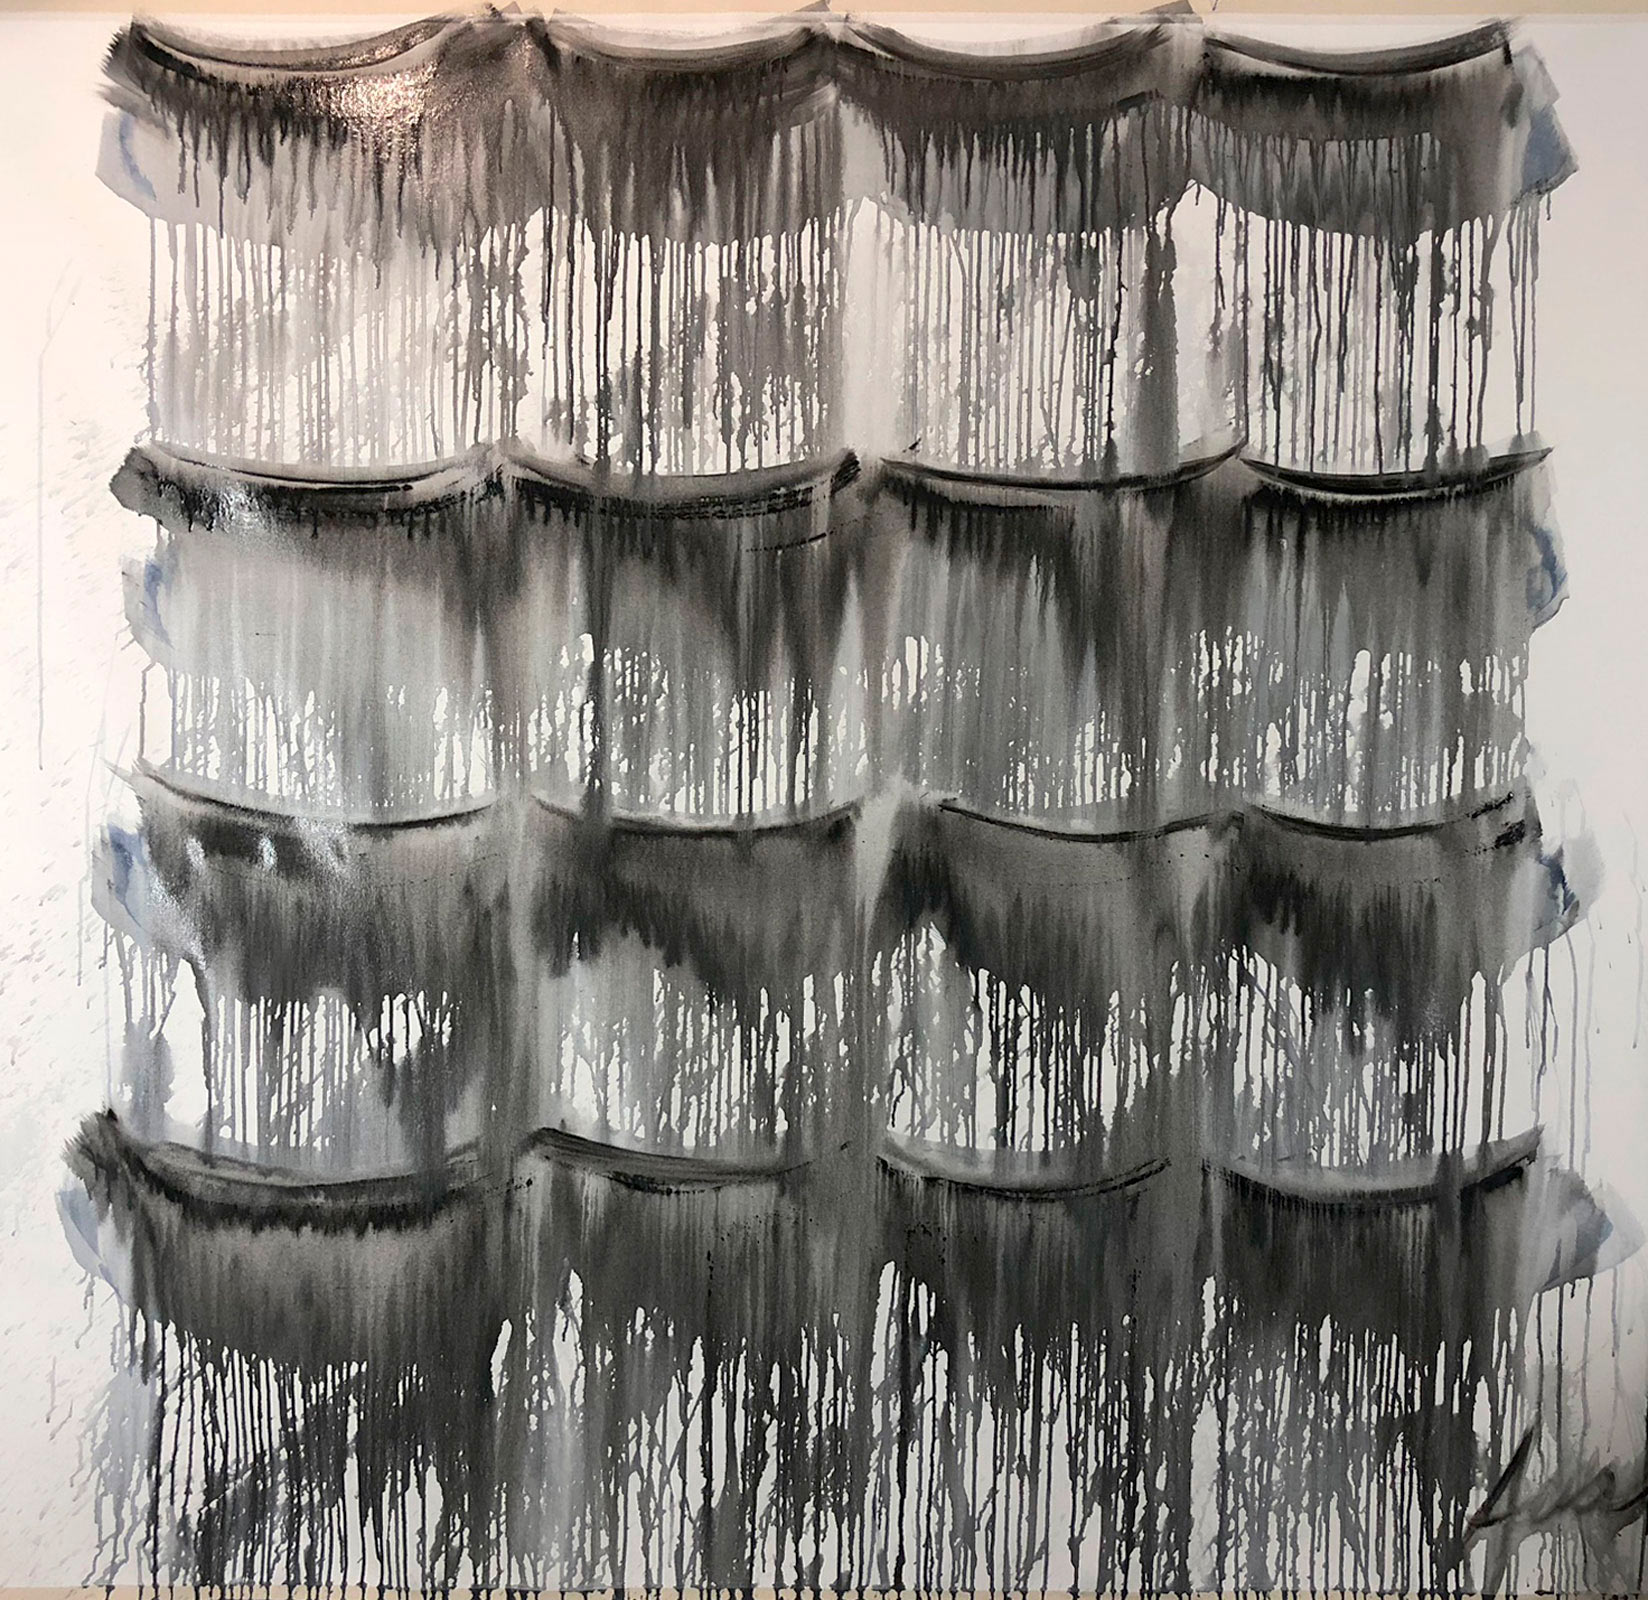 16 Lashes, 2018, acrylic on canvas, 5 x 5 ft, SOLD